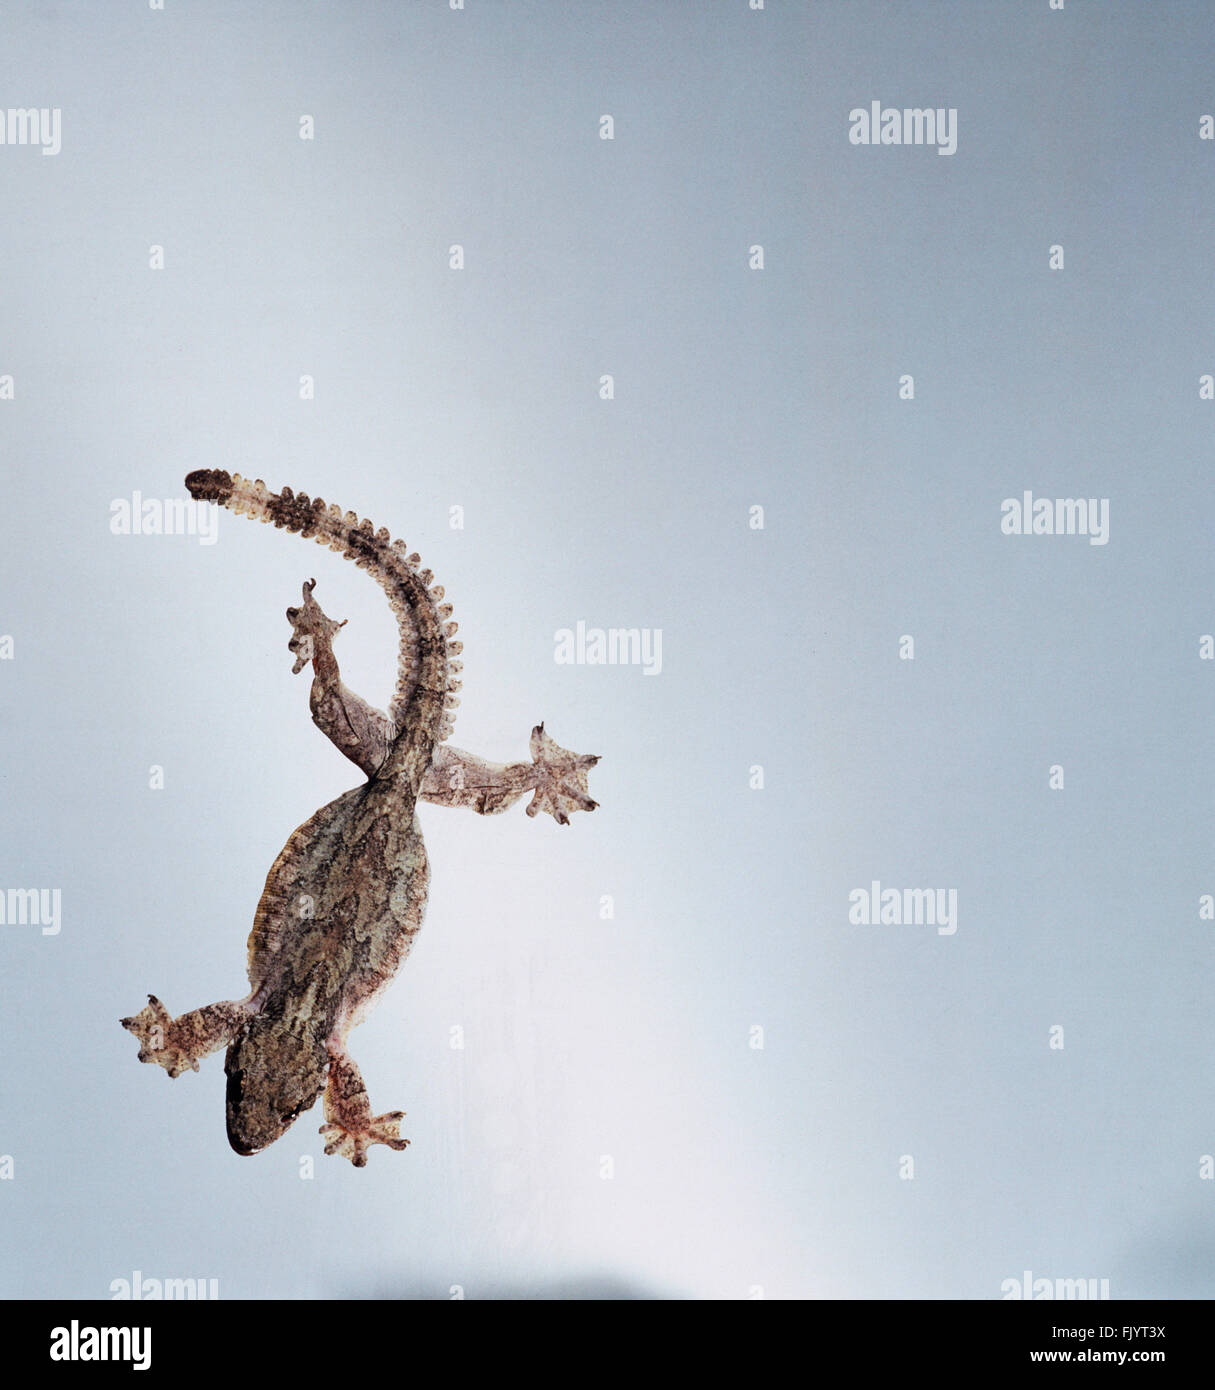 Kuhl's Flying Gecko (Ptychozoon kuhli) clinging to pane of glass, overhead view Stock Photo